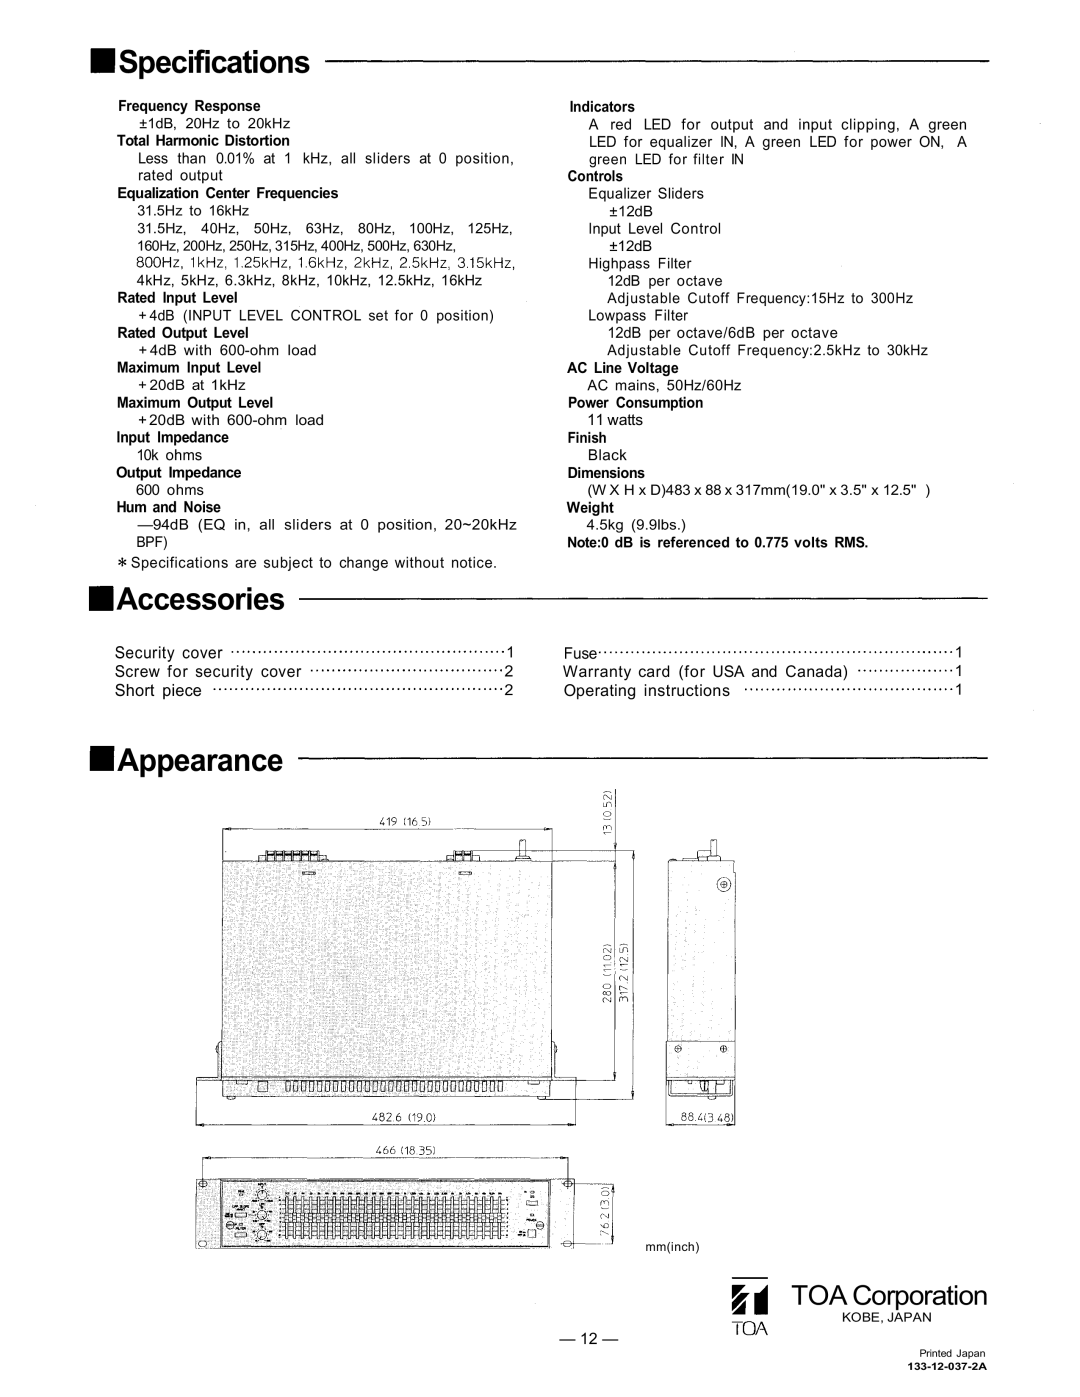 TOA Electronics 1000 Series user service Specifications, Accessories, Appearance, TOA Corporation, Hum and Noise 